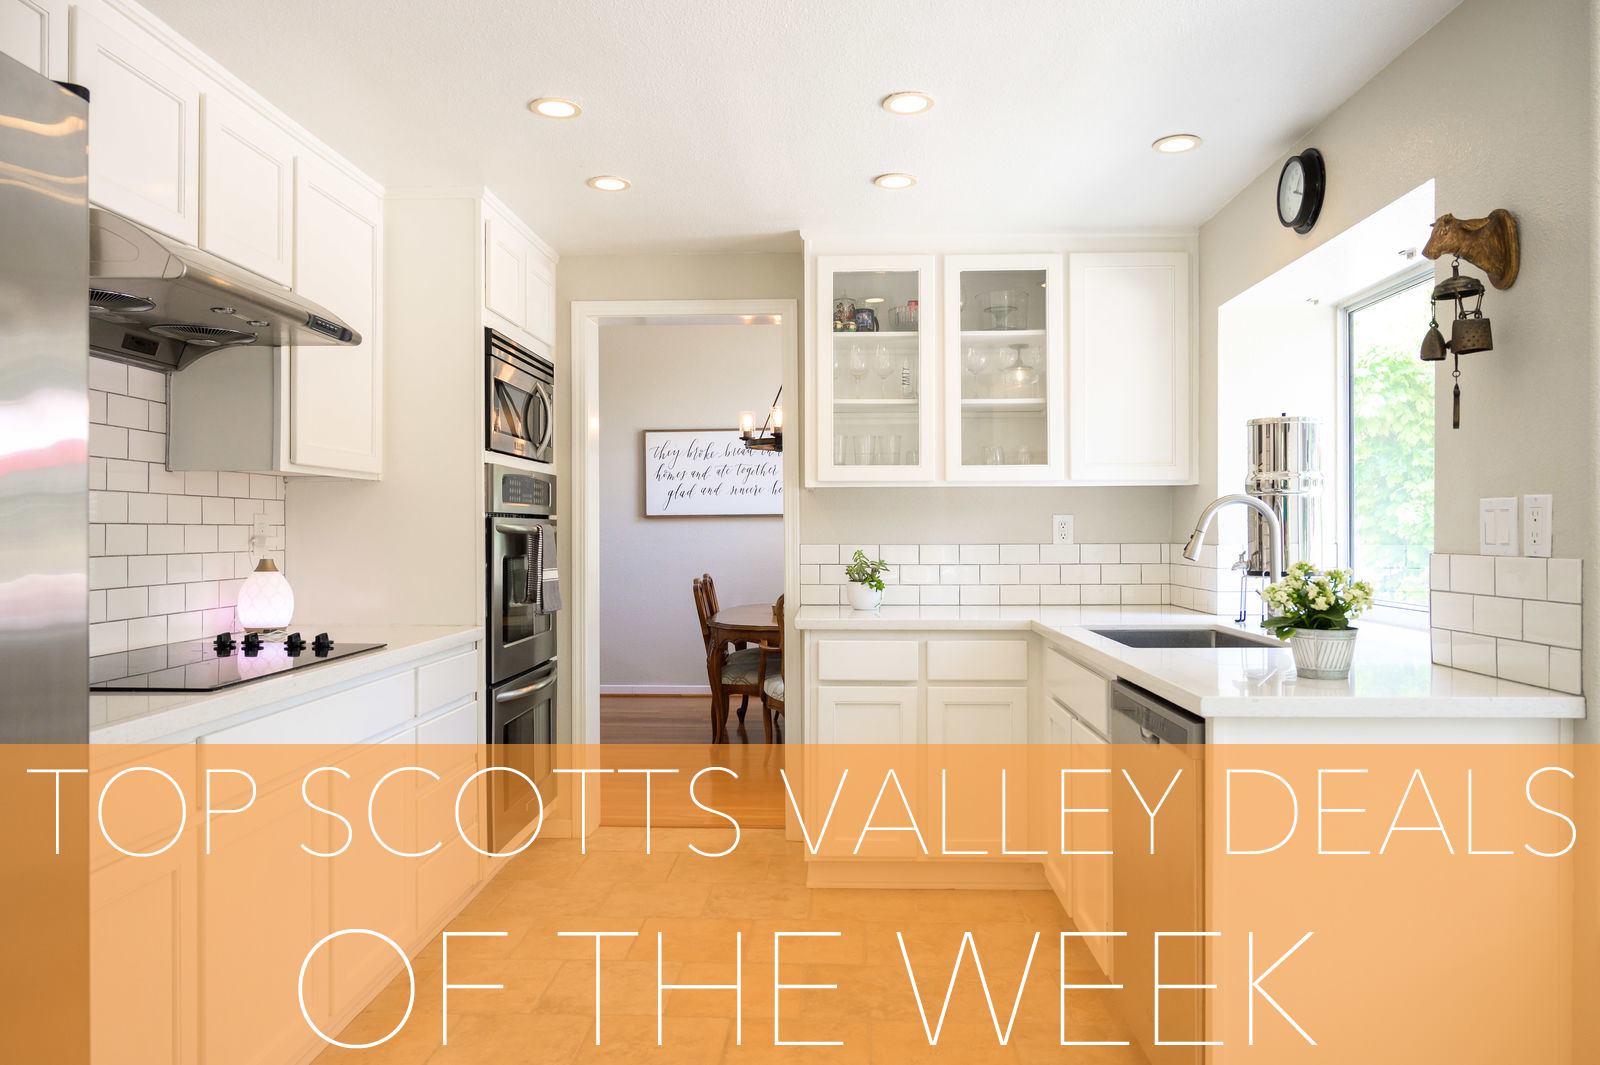 Rob’s Picks for Best Scotts Valley Real Estate Deals